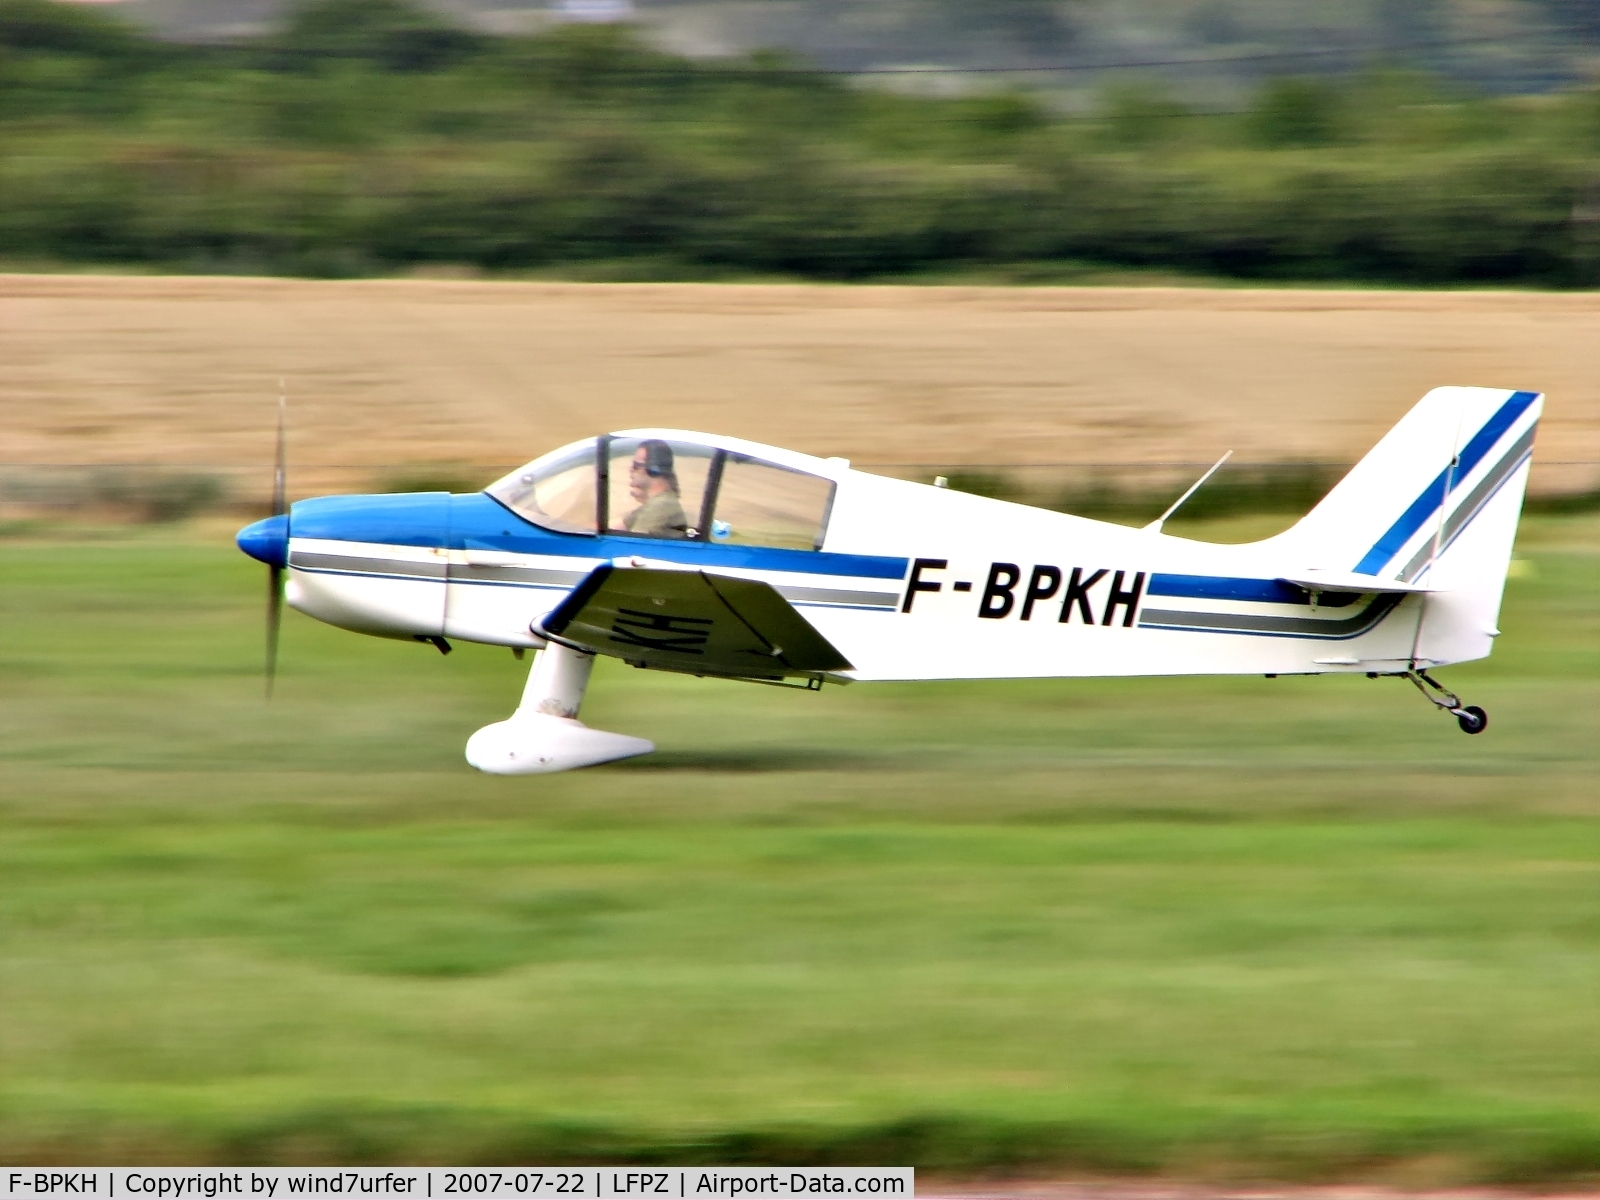 F-BPKH, CEA Jodel DR-221 Dauphin C/N 108, Touch on 29L